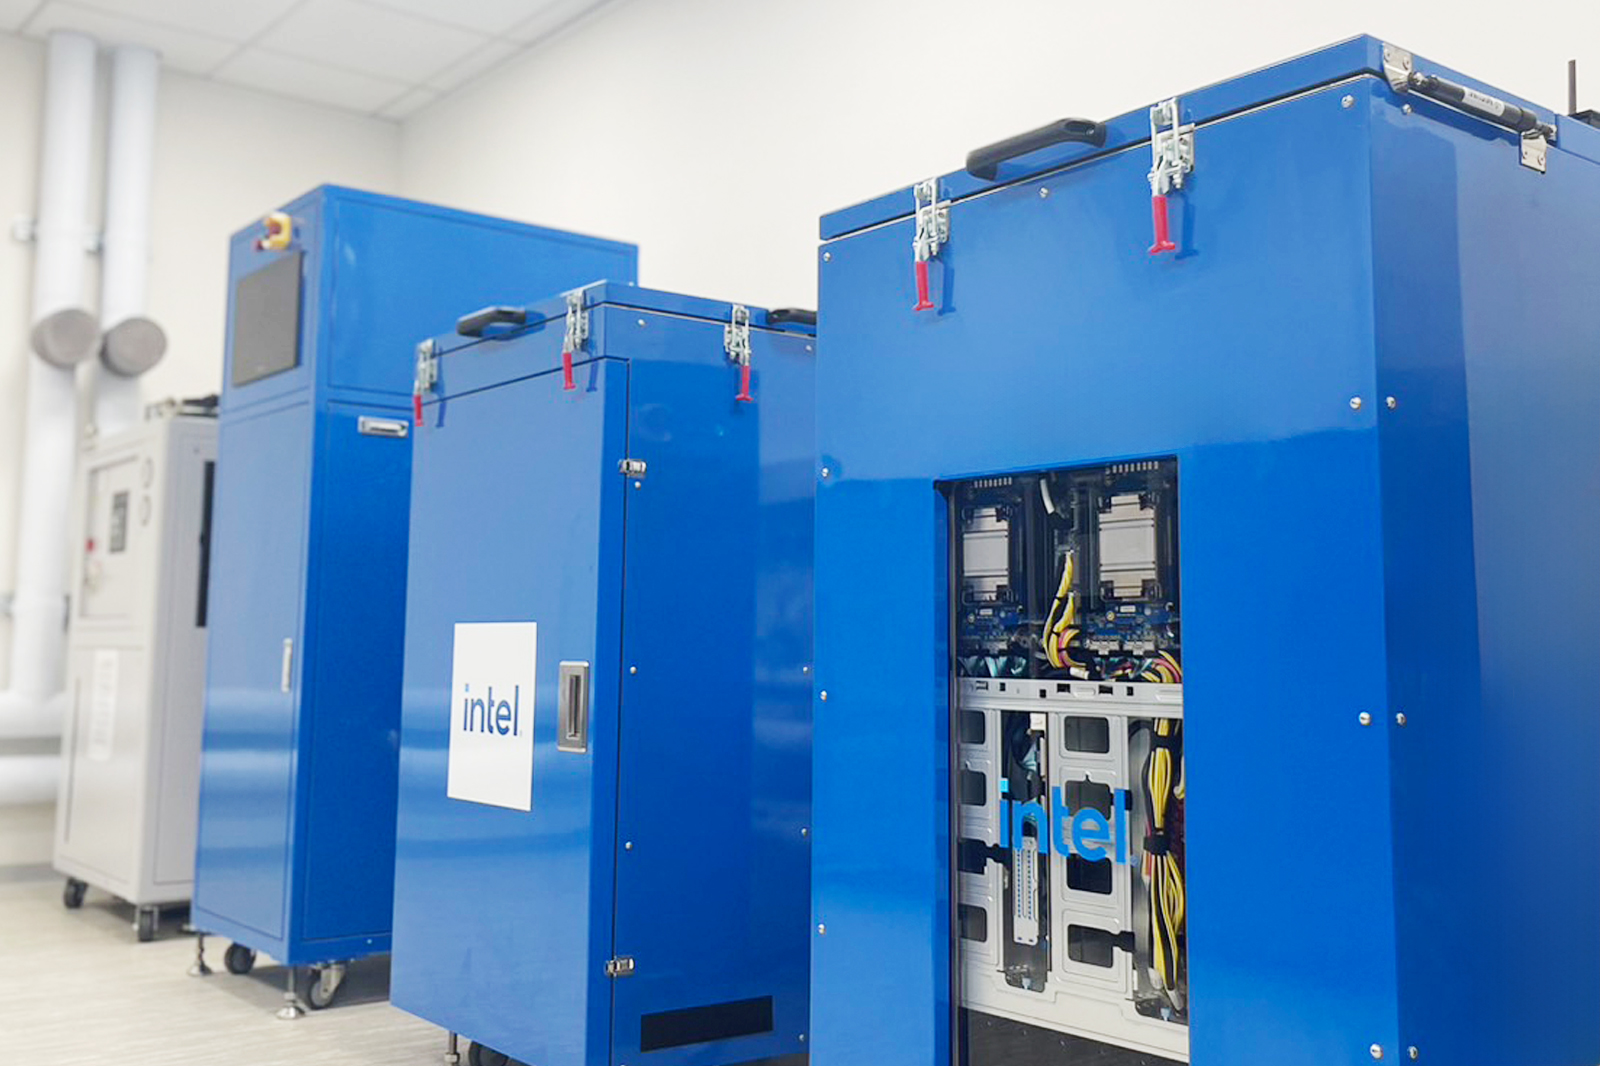 The ITRI-Intel Joint Lab for HPC Cooling Certification focuses on developing and validating industrial immersion cooling solutions for high-performance computing.